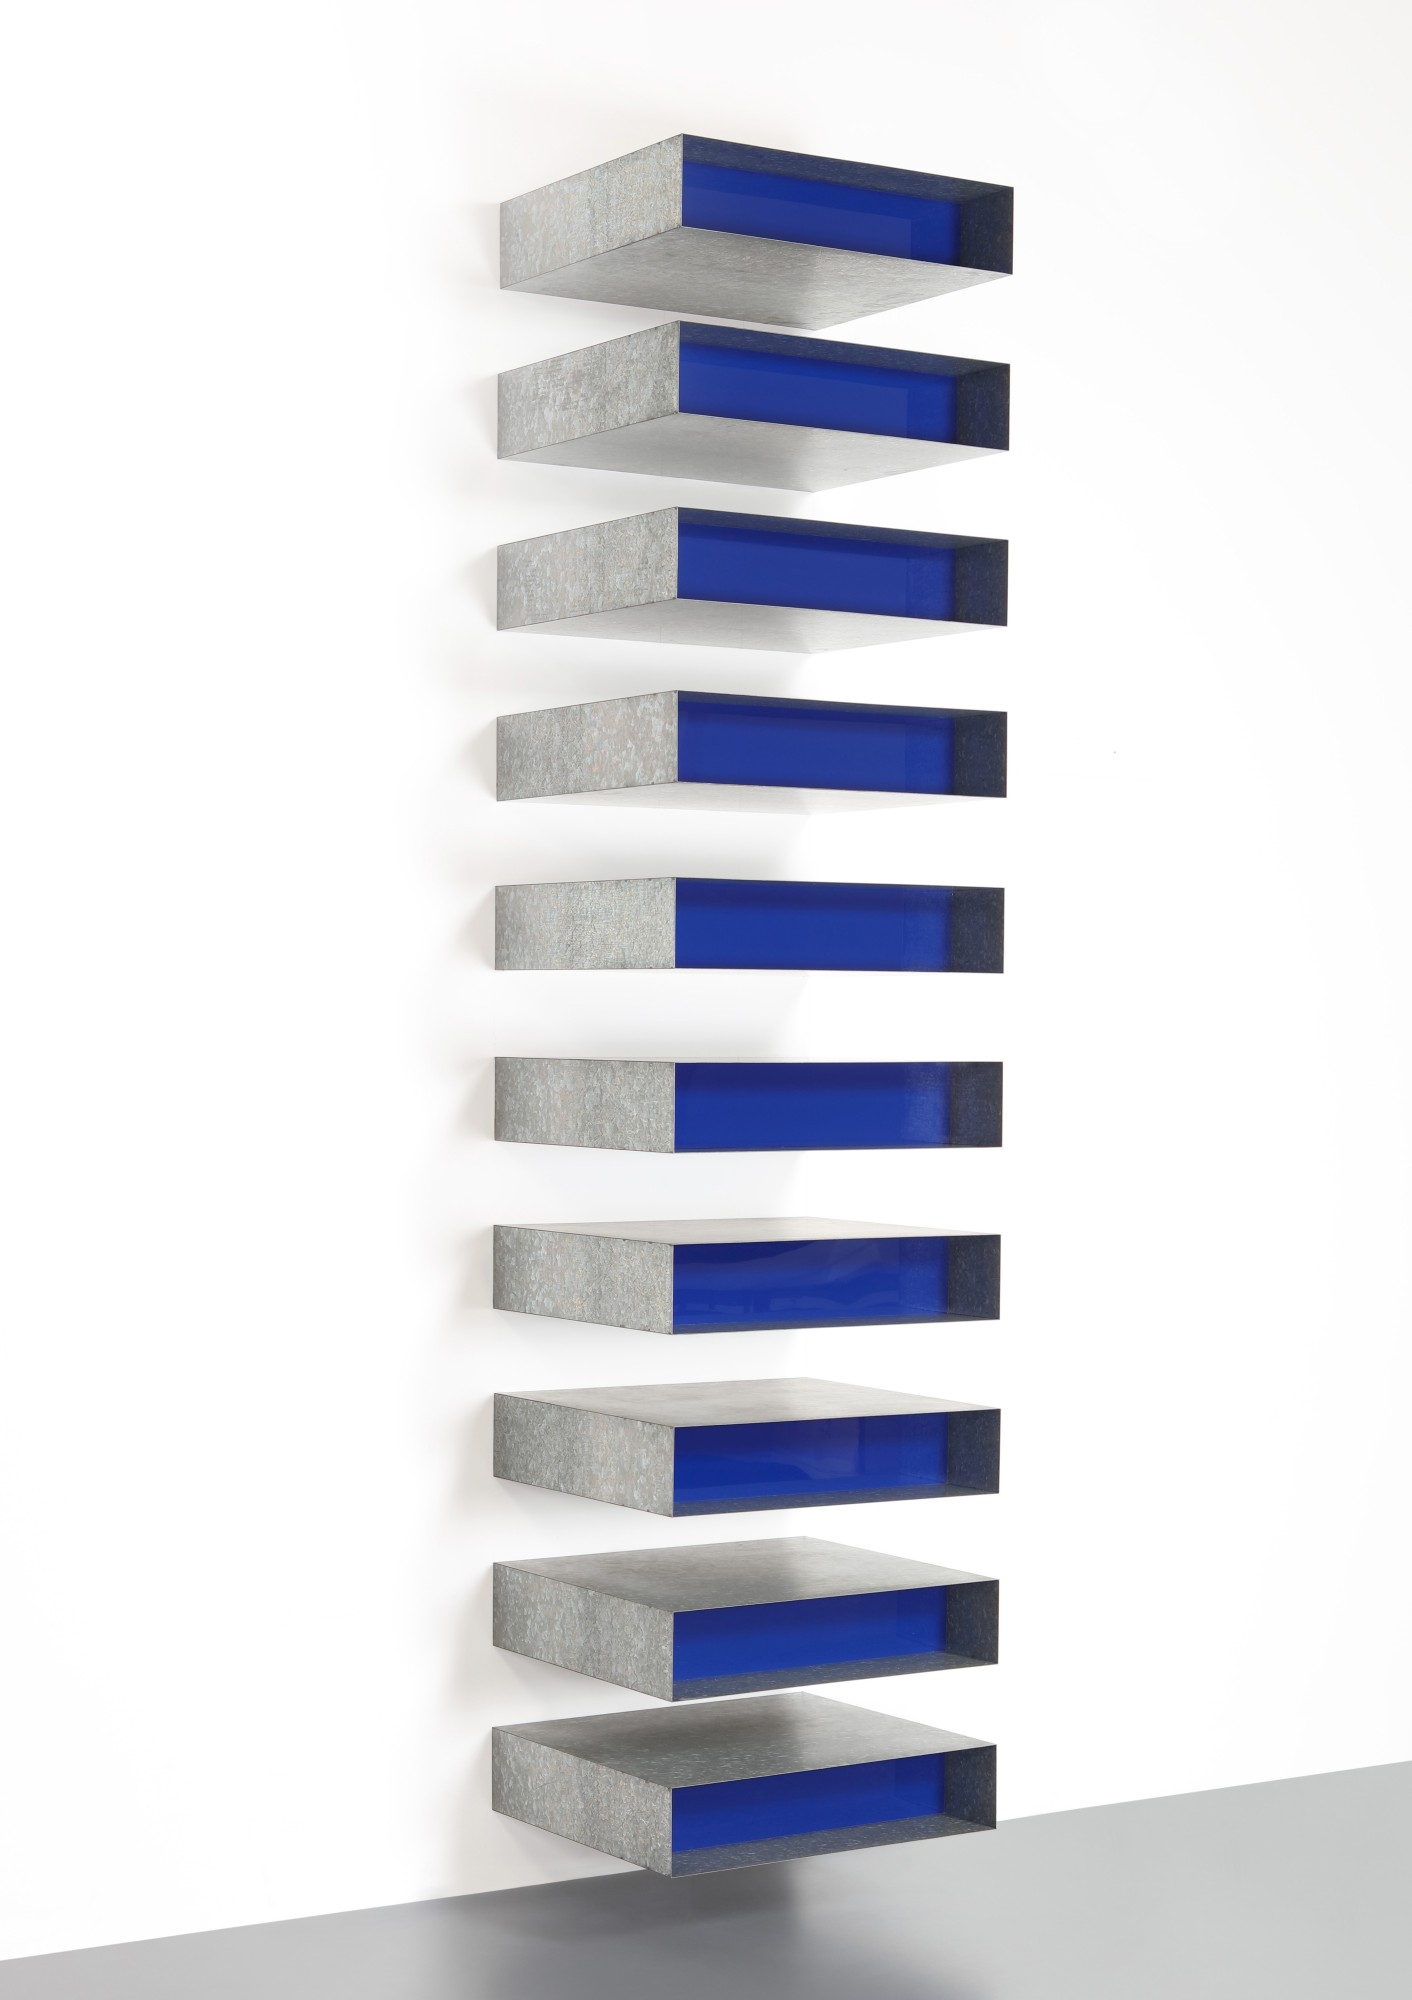 UNTITLED by Donald Judd, Executed in 1978